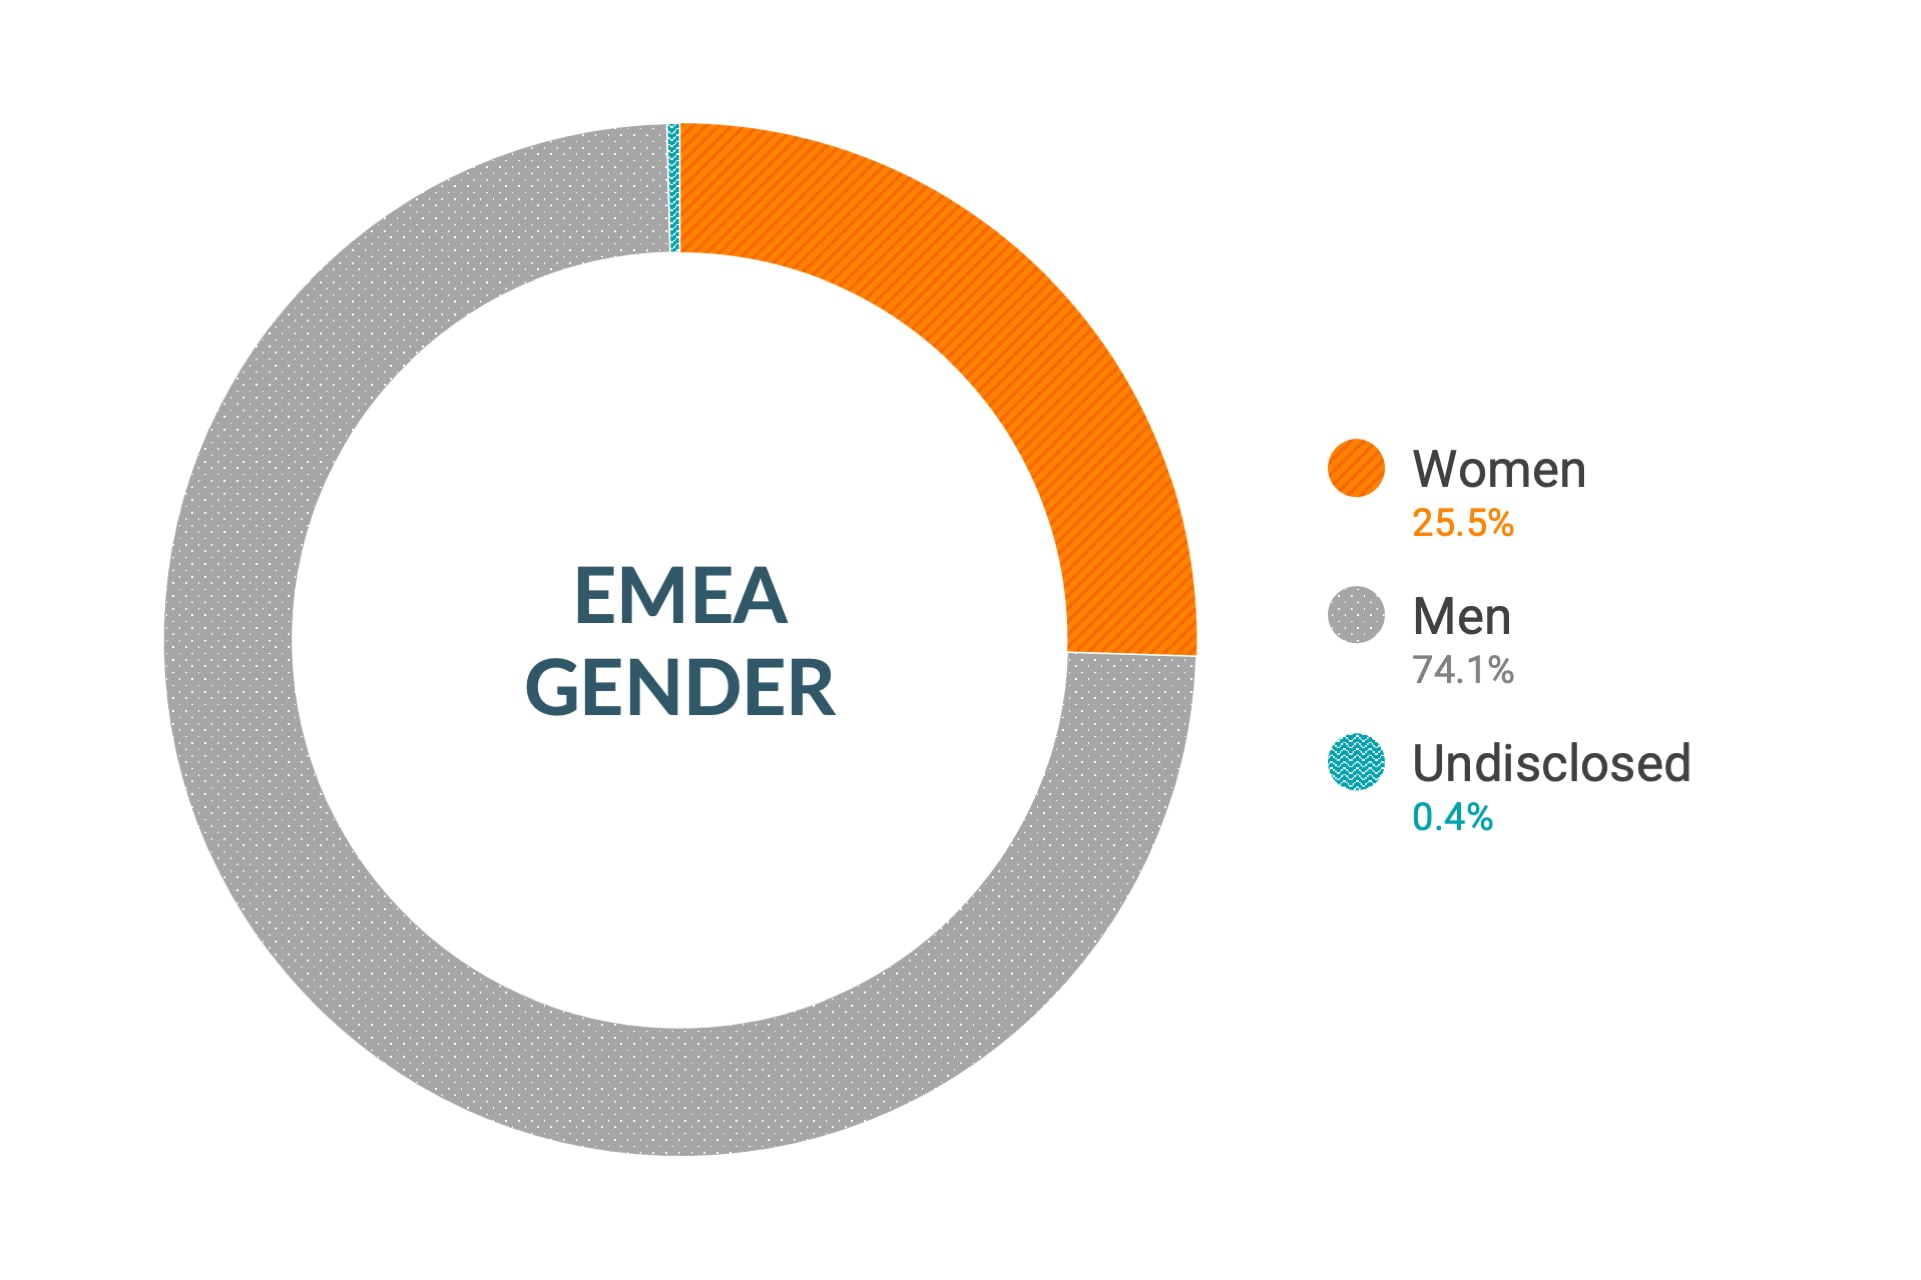 Cloudera Diversity and Inclusion data for EMEA Gender: Women 26.8%, Men 72.8%, Undisclosed 0.4%%